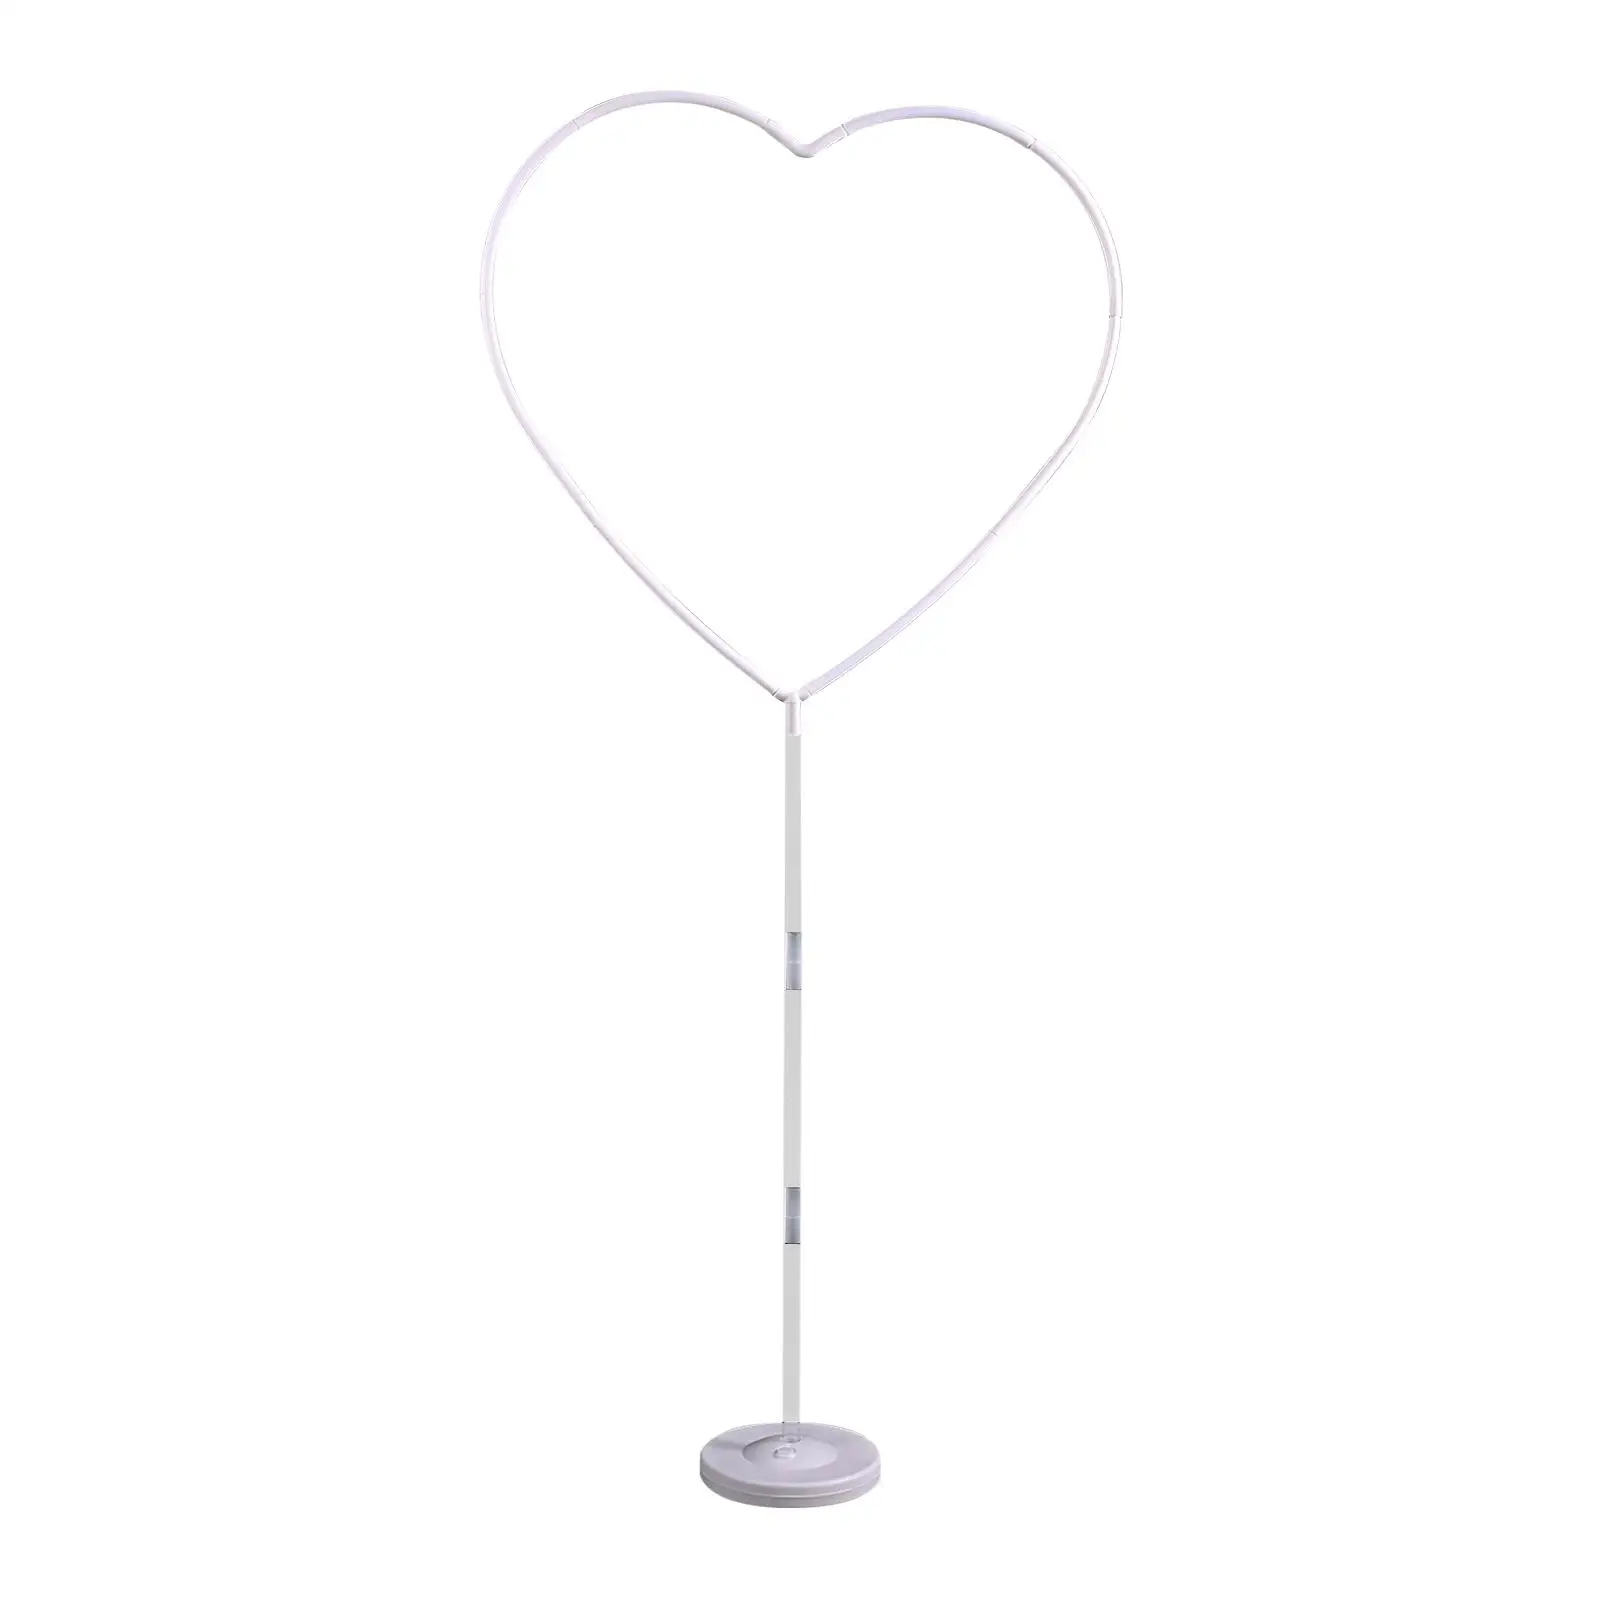 Heart Shaped Balloon Arch Stand Frame Display Kit for Wedding Decoration